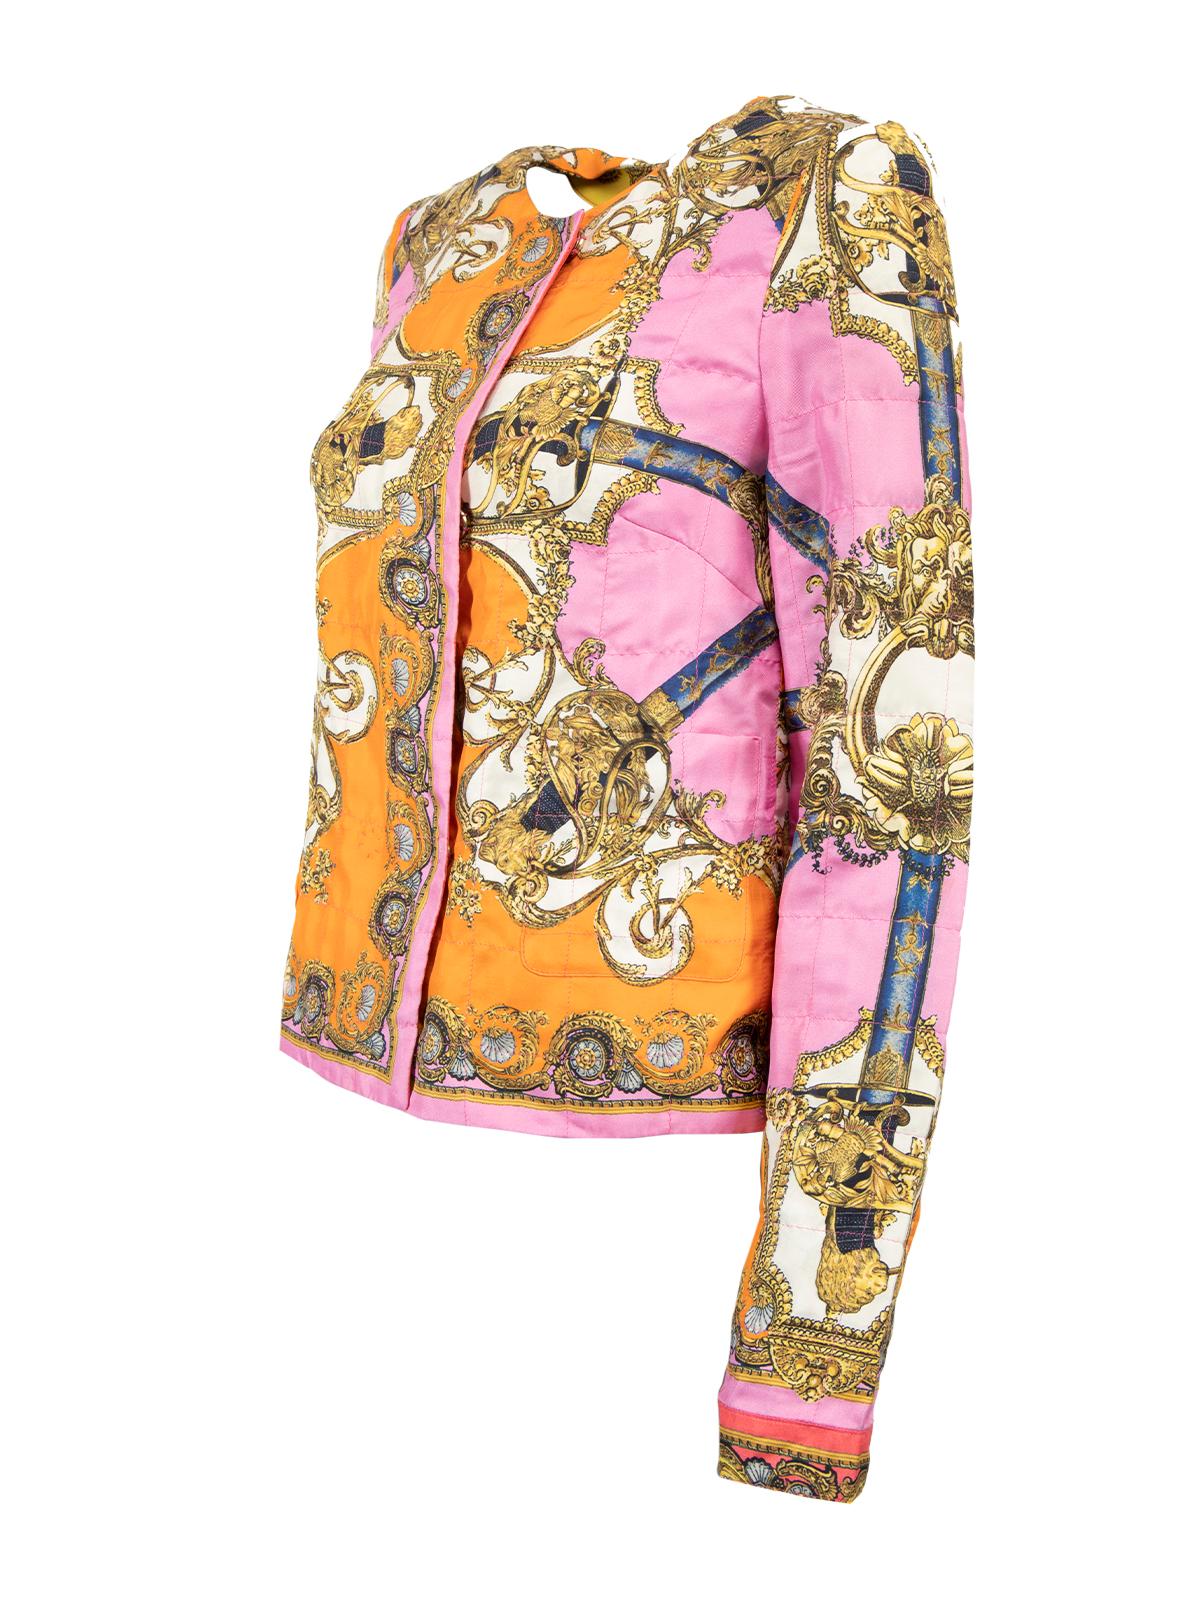 Dolce & Gabbana Women's Multicolour Lightweight Jacket with Pockets For Sale 1